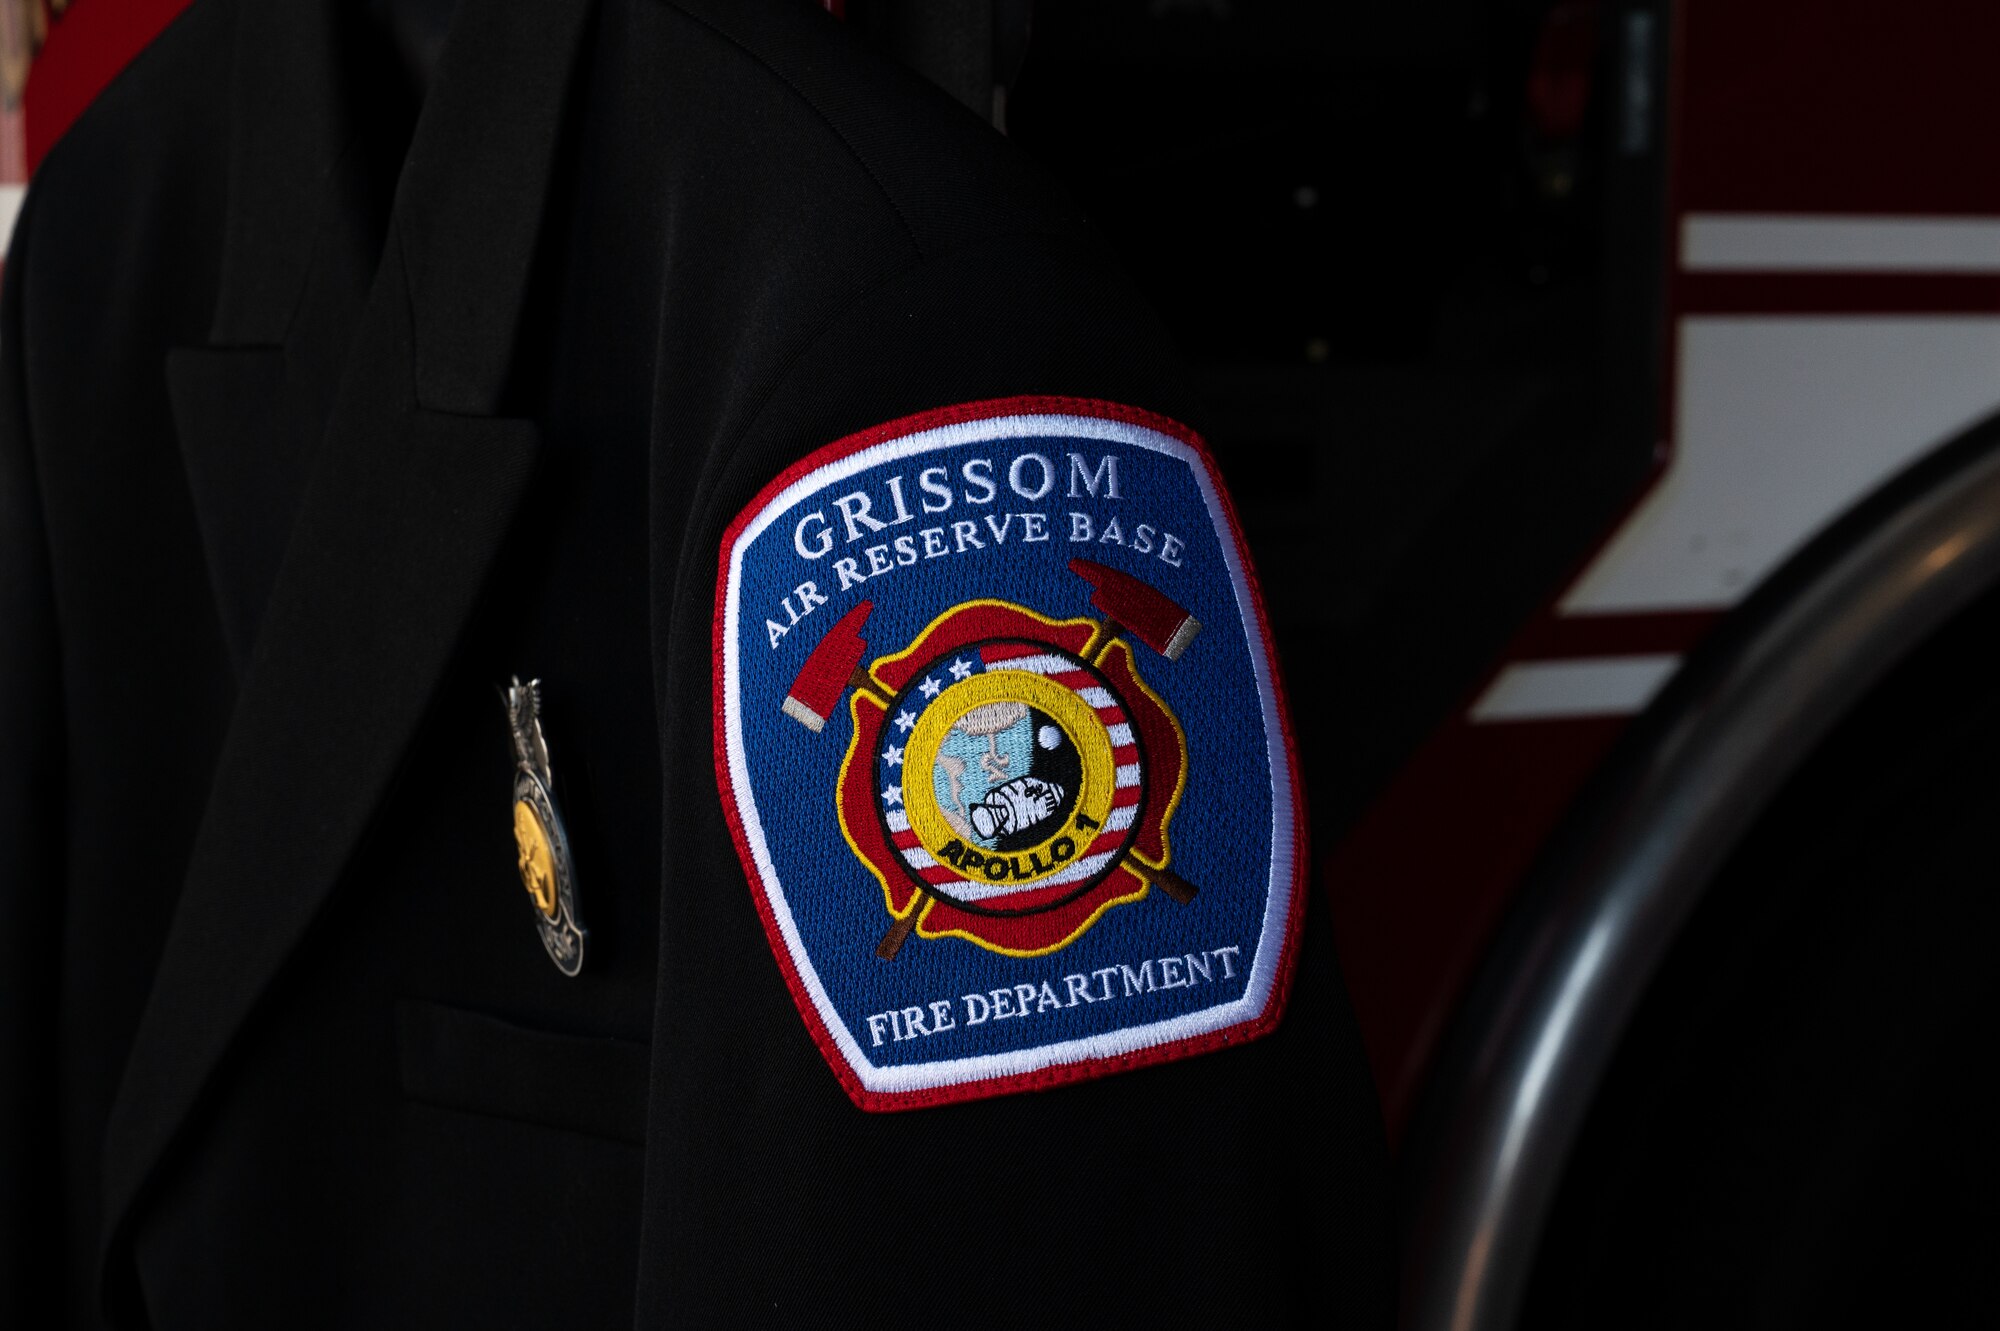 A patch that reads "GRISSOM AIR RESERVE BASE FIRE DEPARTMENT" with an emblem that displays the Apollo 1 with an American flag visible in the background, accompanied by fire axes on either side.